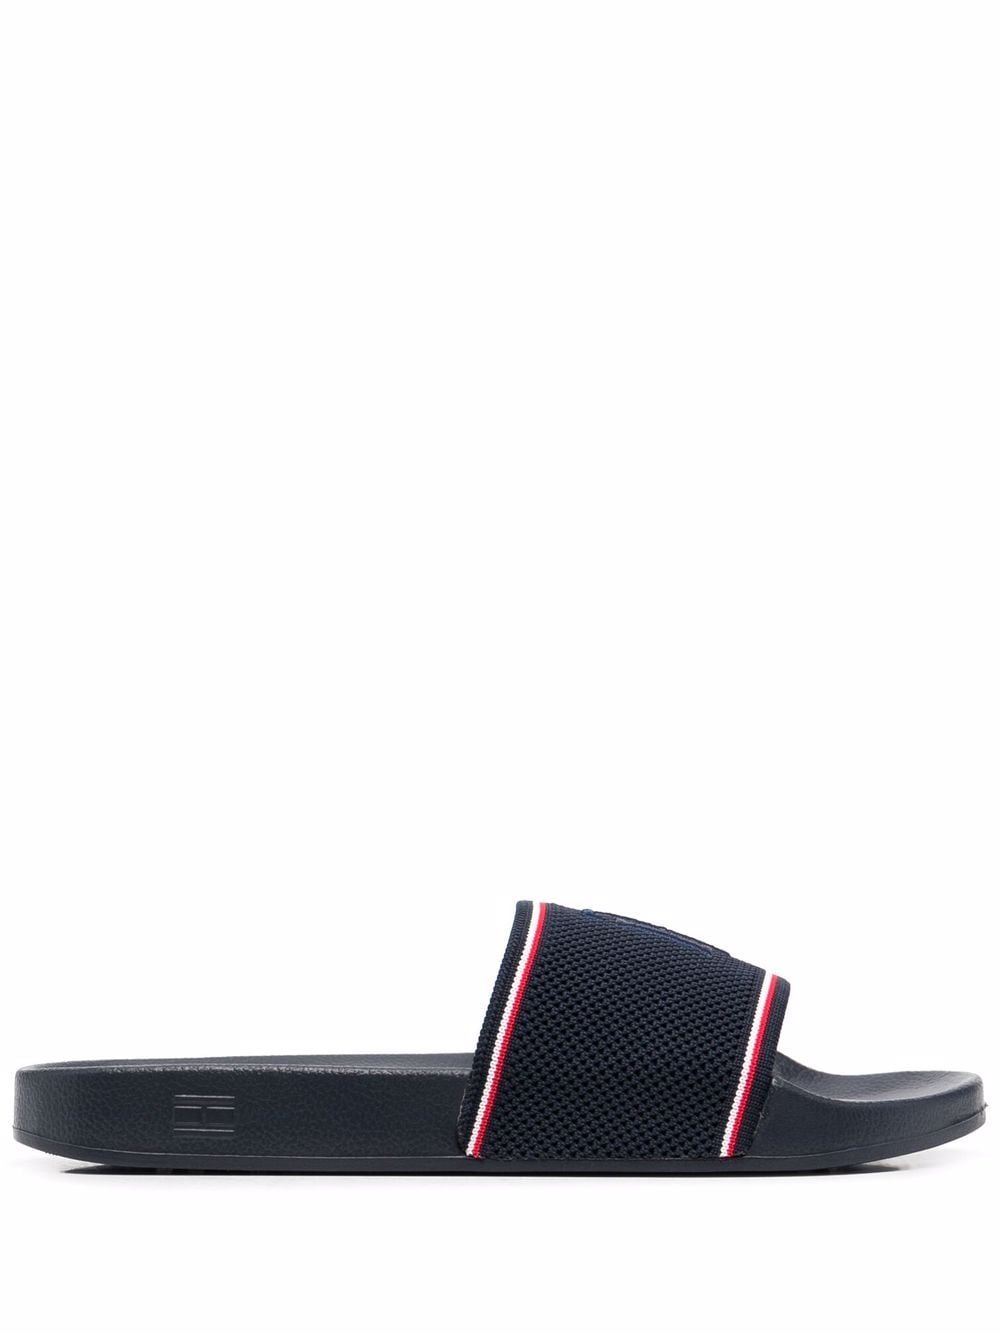 фото Tommy hilfiger шлепанцы tommy